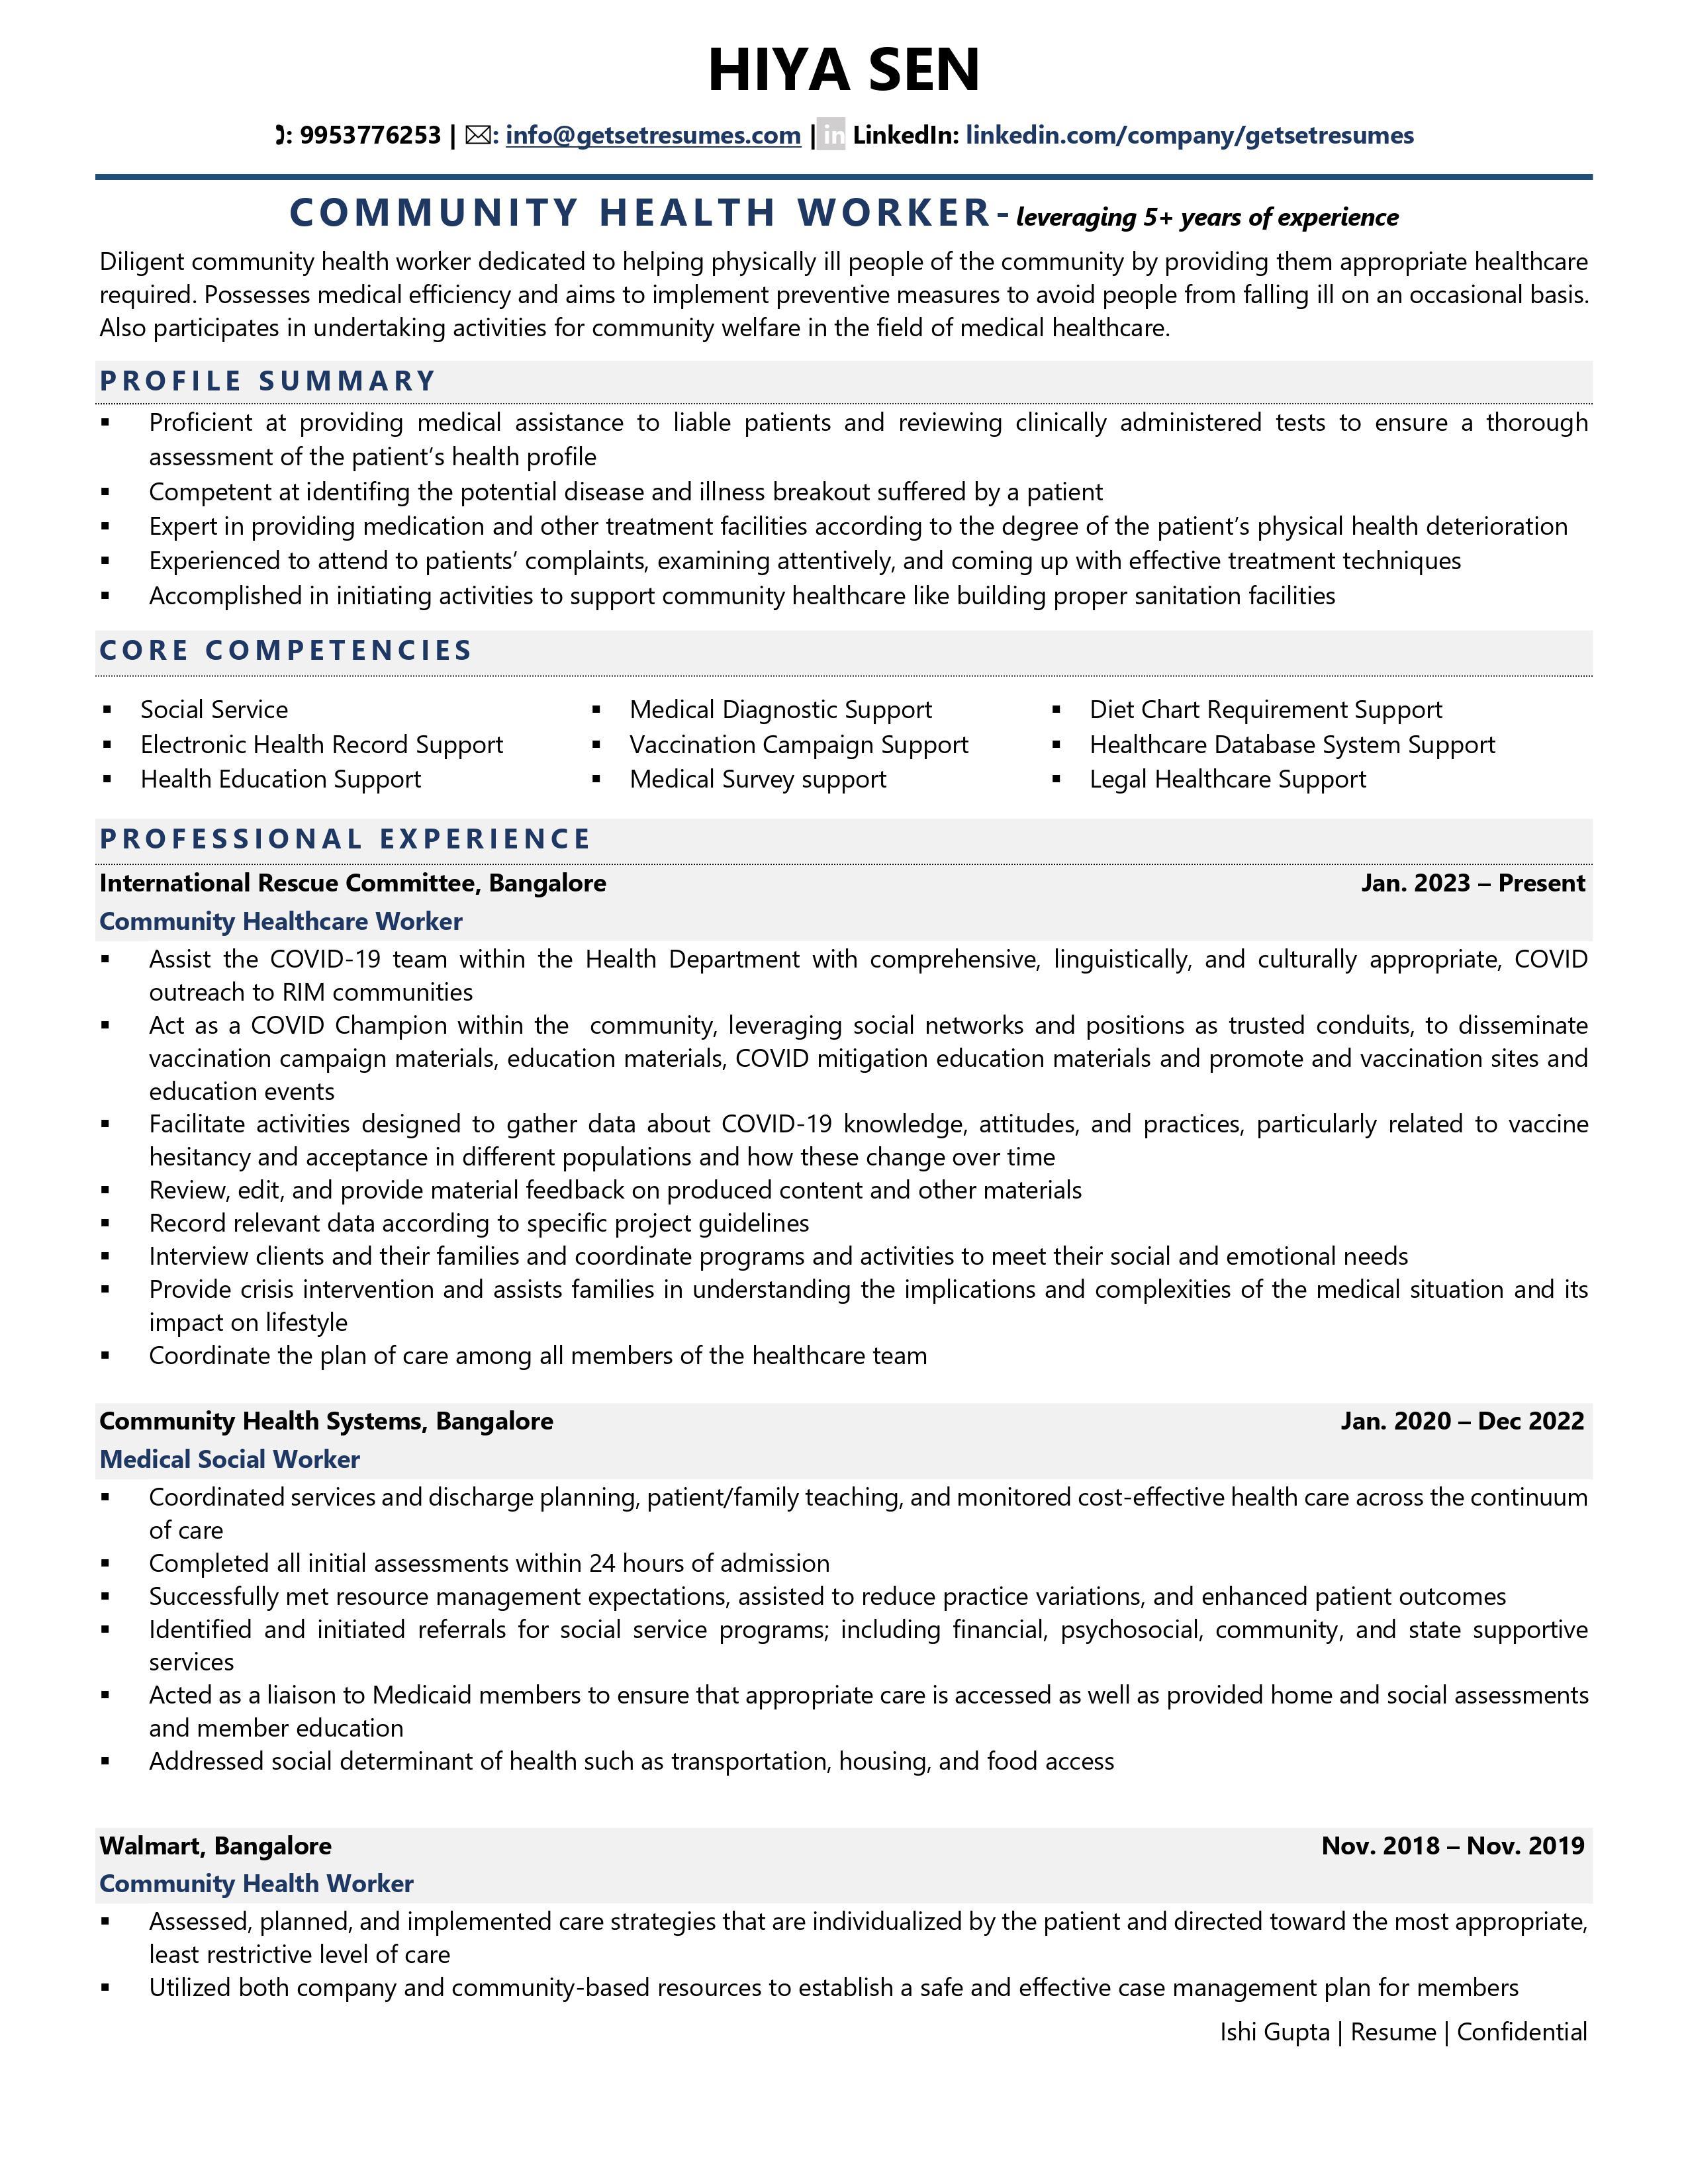 Community Health Worker - Resume Example & Template